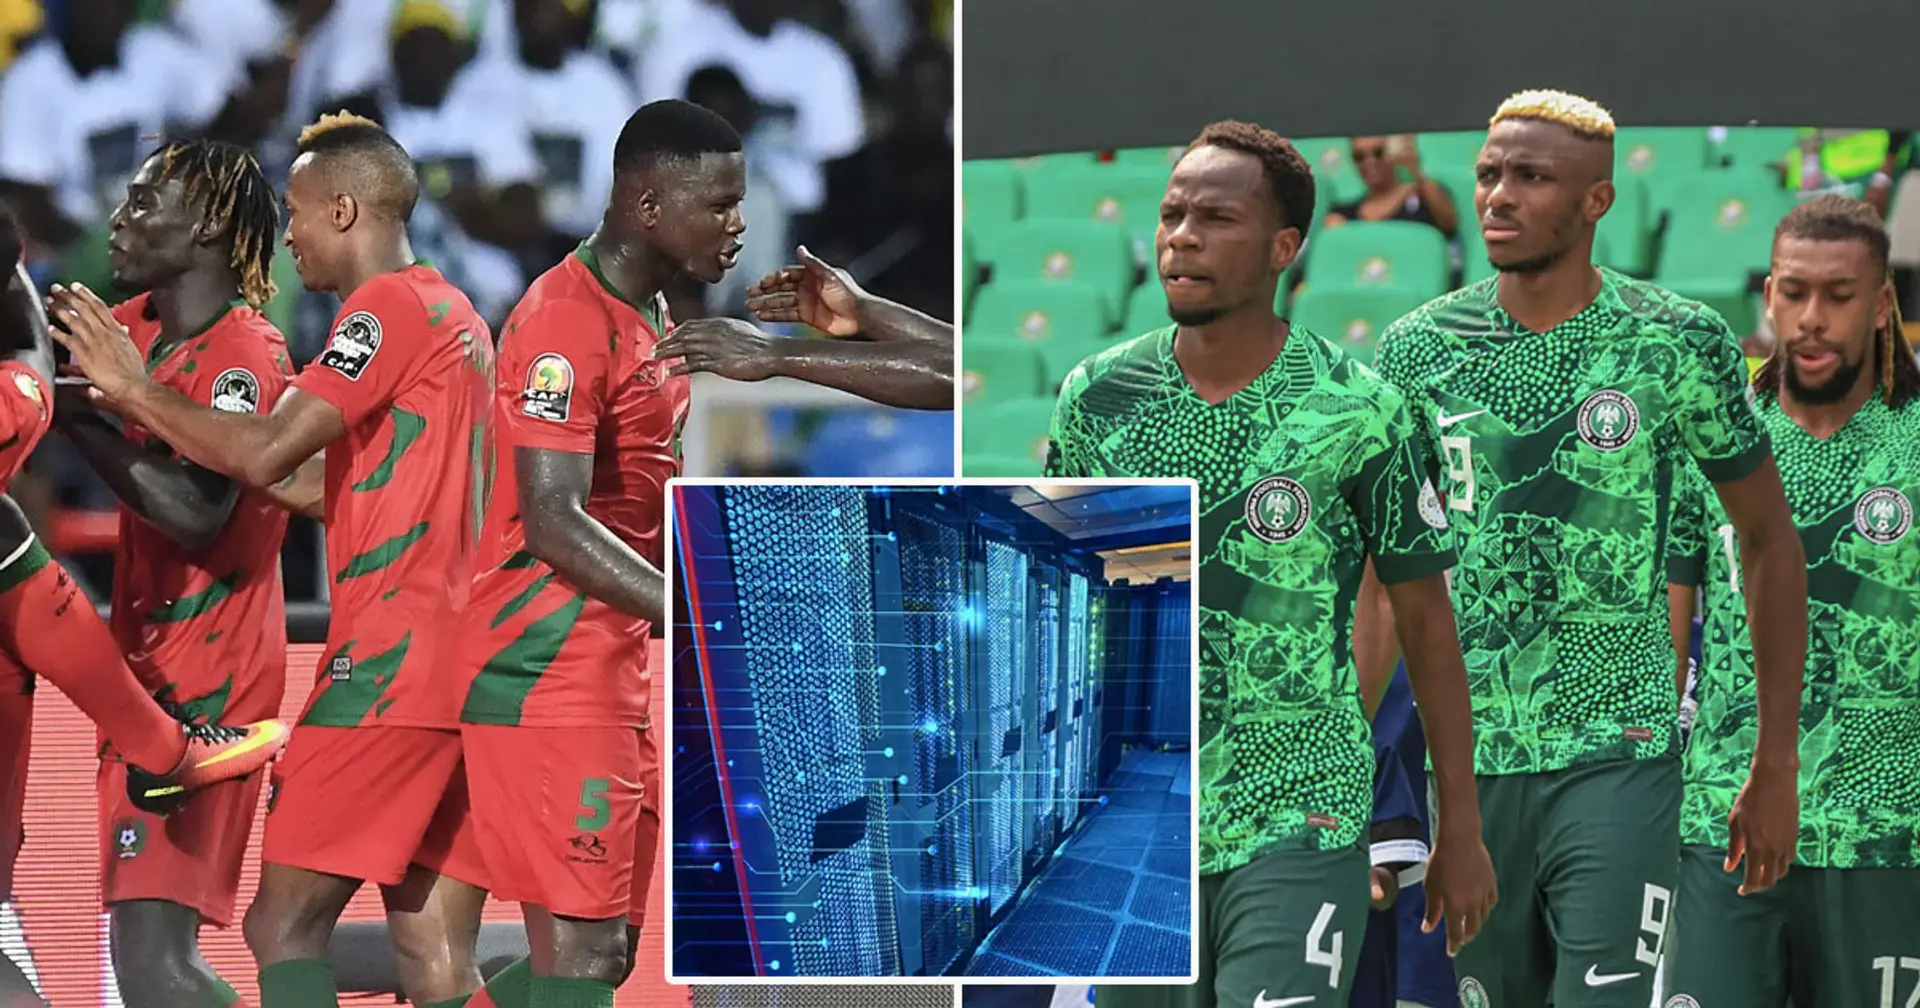 Guinea-Bissau vs Nigeria: supercomputer makes score predictions - and gives away betting tips